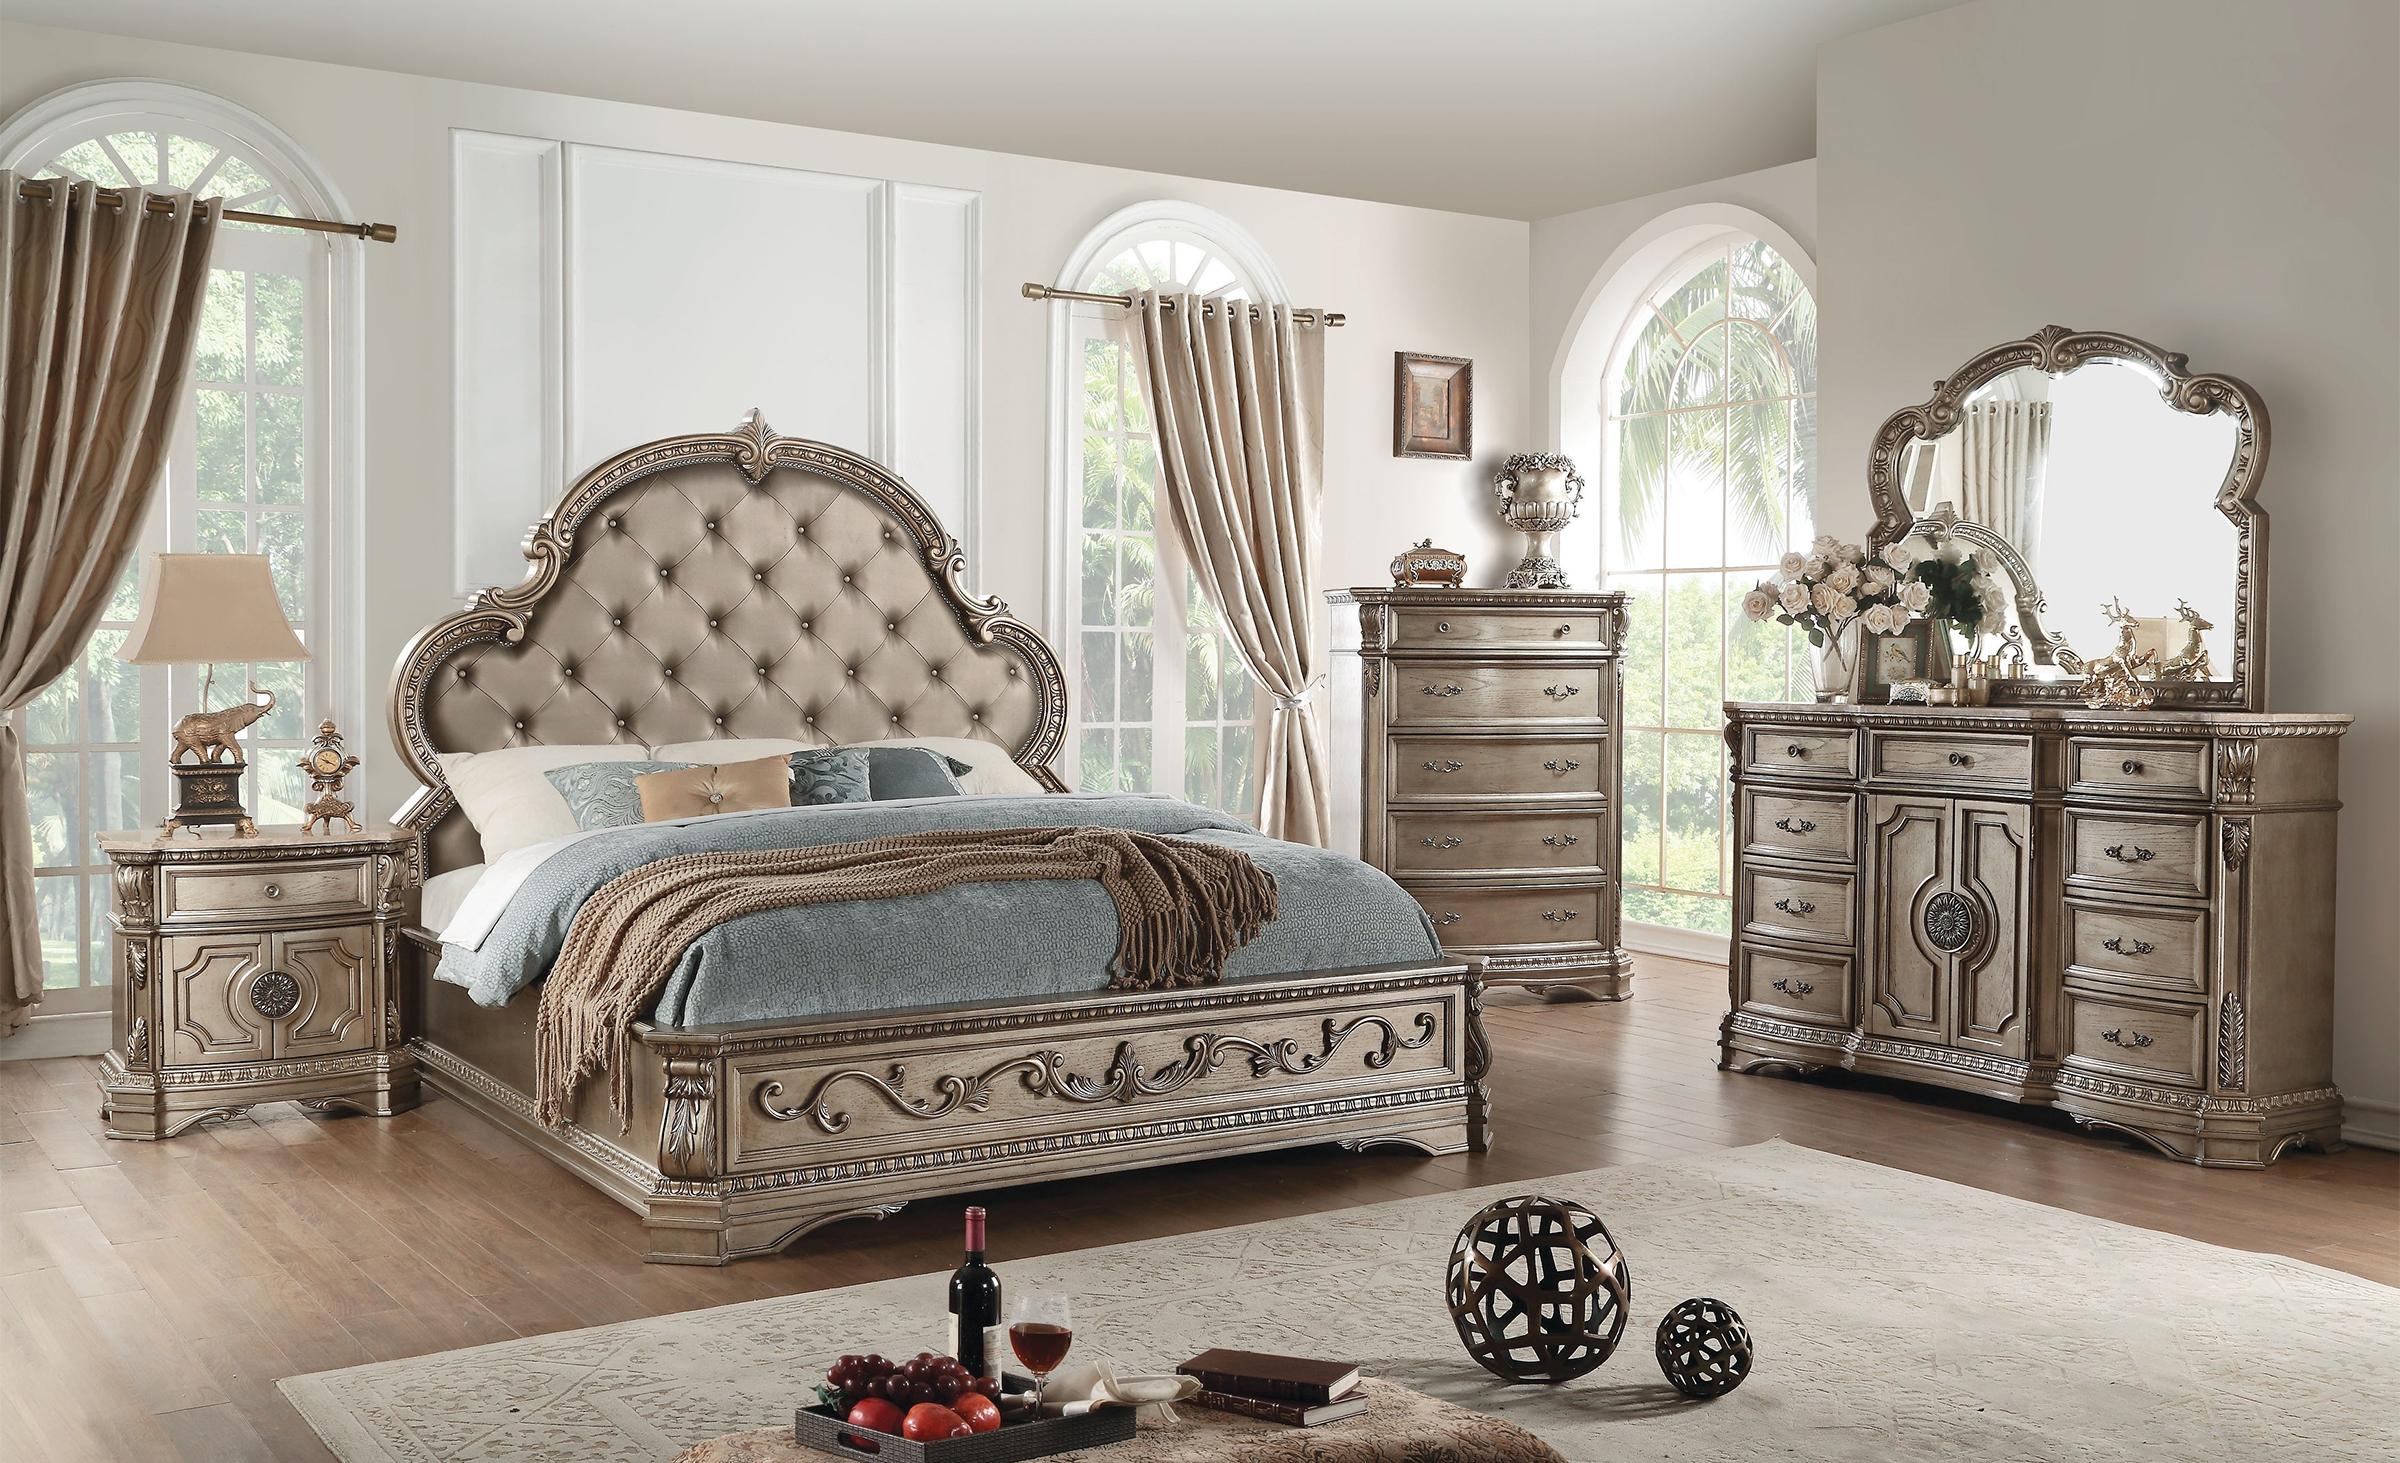 

    
Neagle King Upholstered Standard Bedroom Set 3Pcs Traditional Classic
